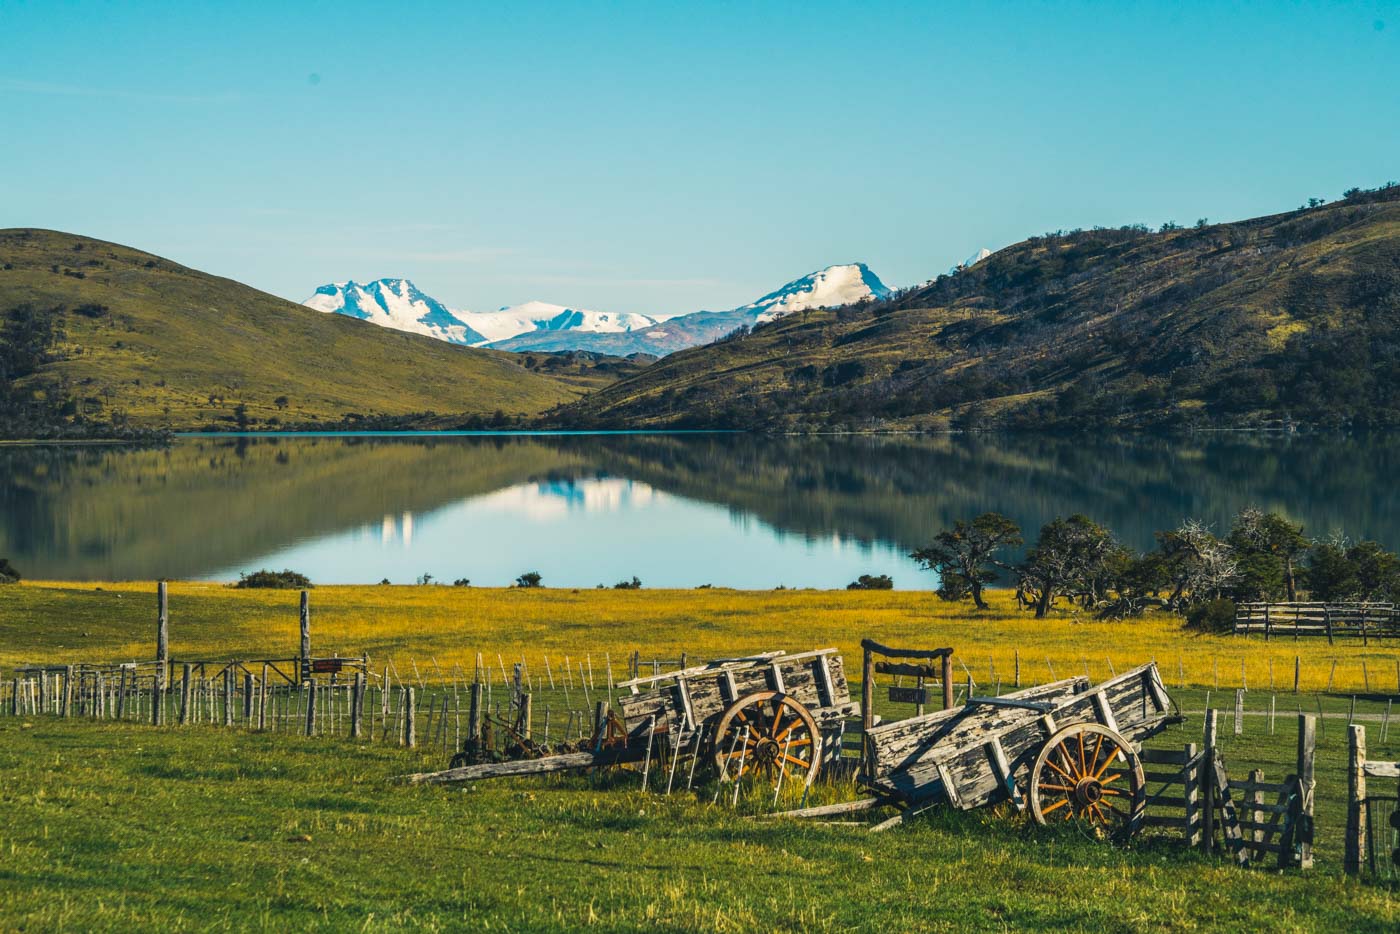 20 Photos that Demonstrate the undeniable beauty of Chilean Patagonia